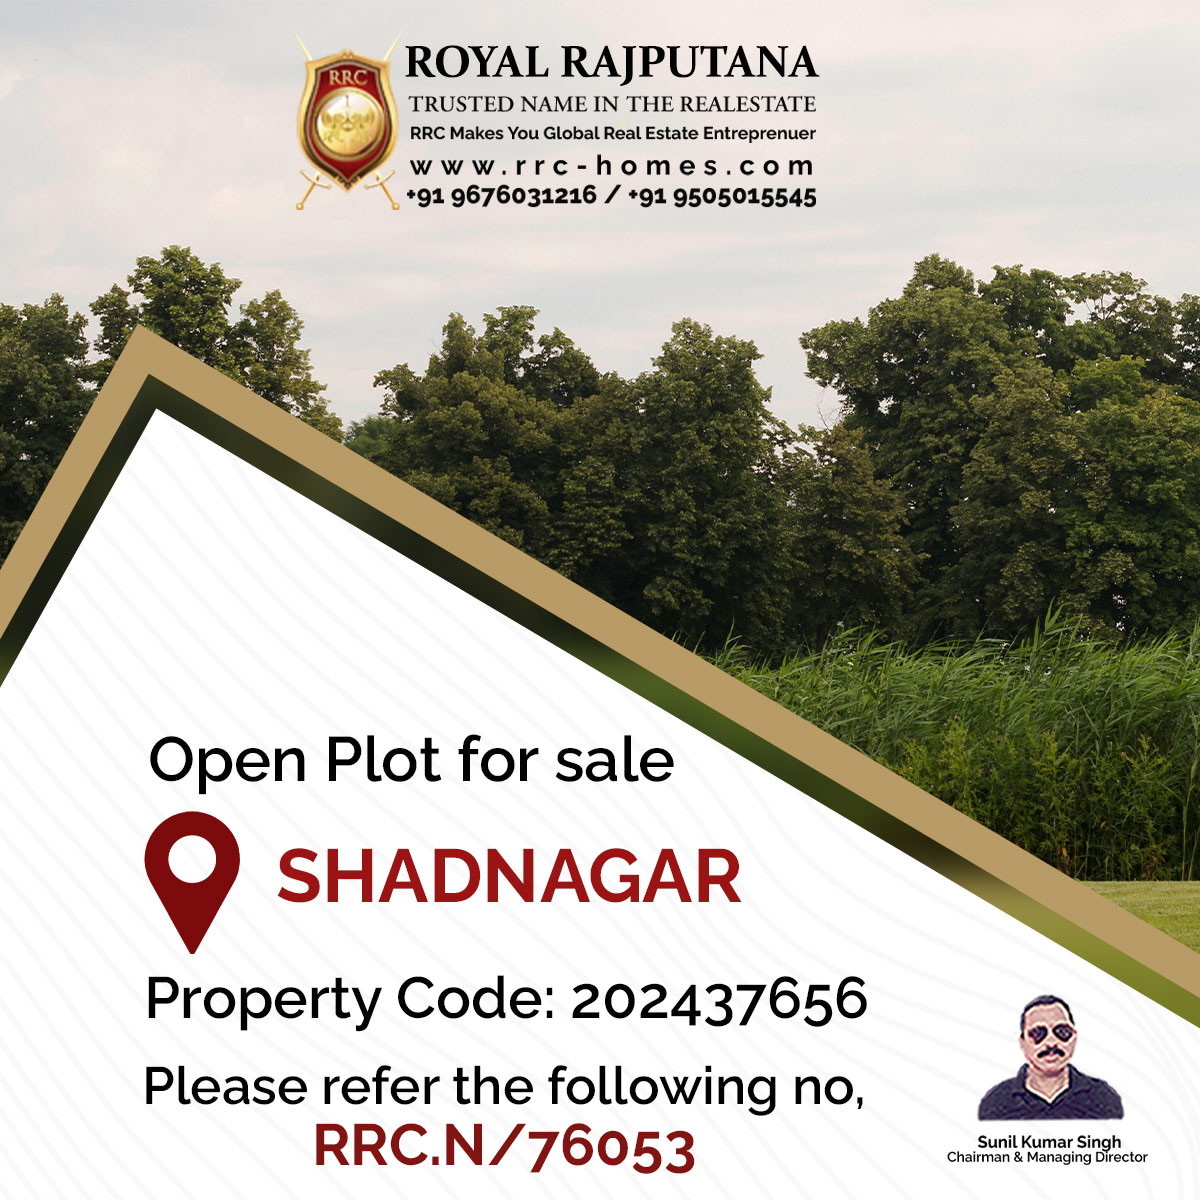 Open plot for sale in SHADNAGAR
Property Code: 202437656
Please refer the following no, RRC.N/76053

#royalrajputana #royalrajputanahomes #rrc #rrchomes #sale #lease #rent #propertyservices #partnership #everything #openplot #sale #shadnagar #propertycode #refer